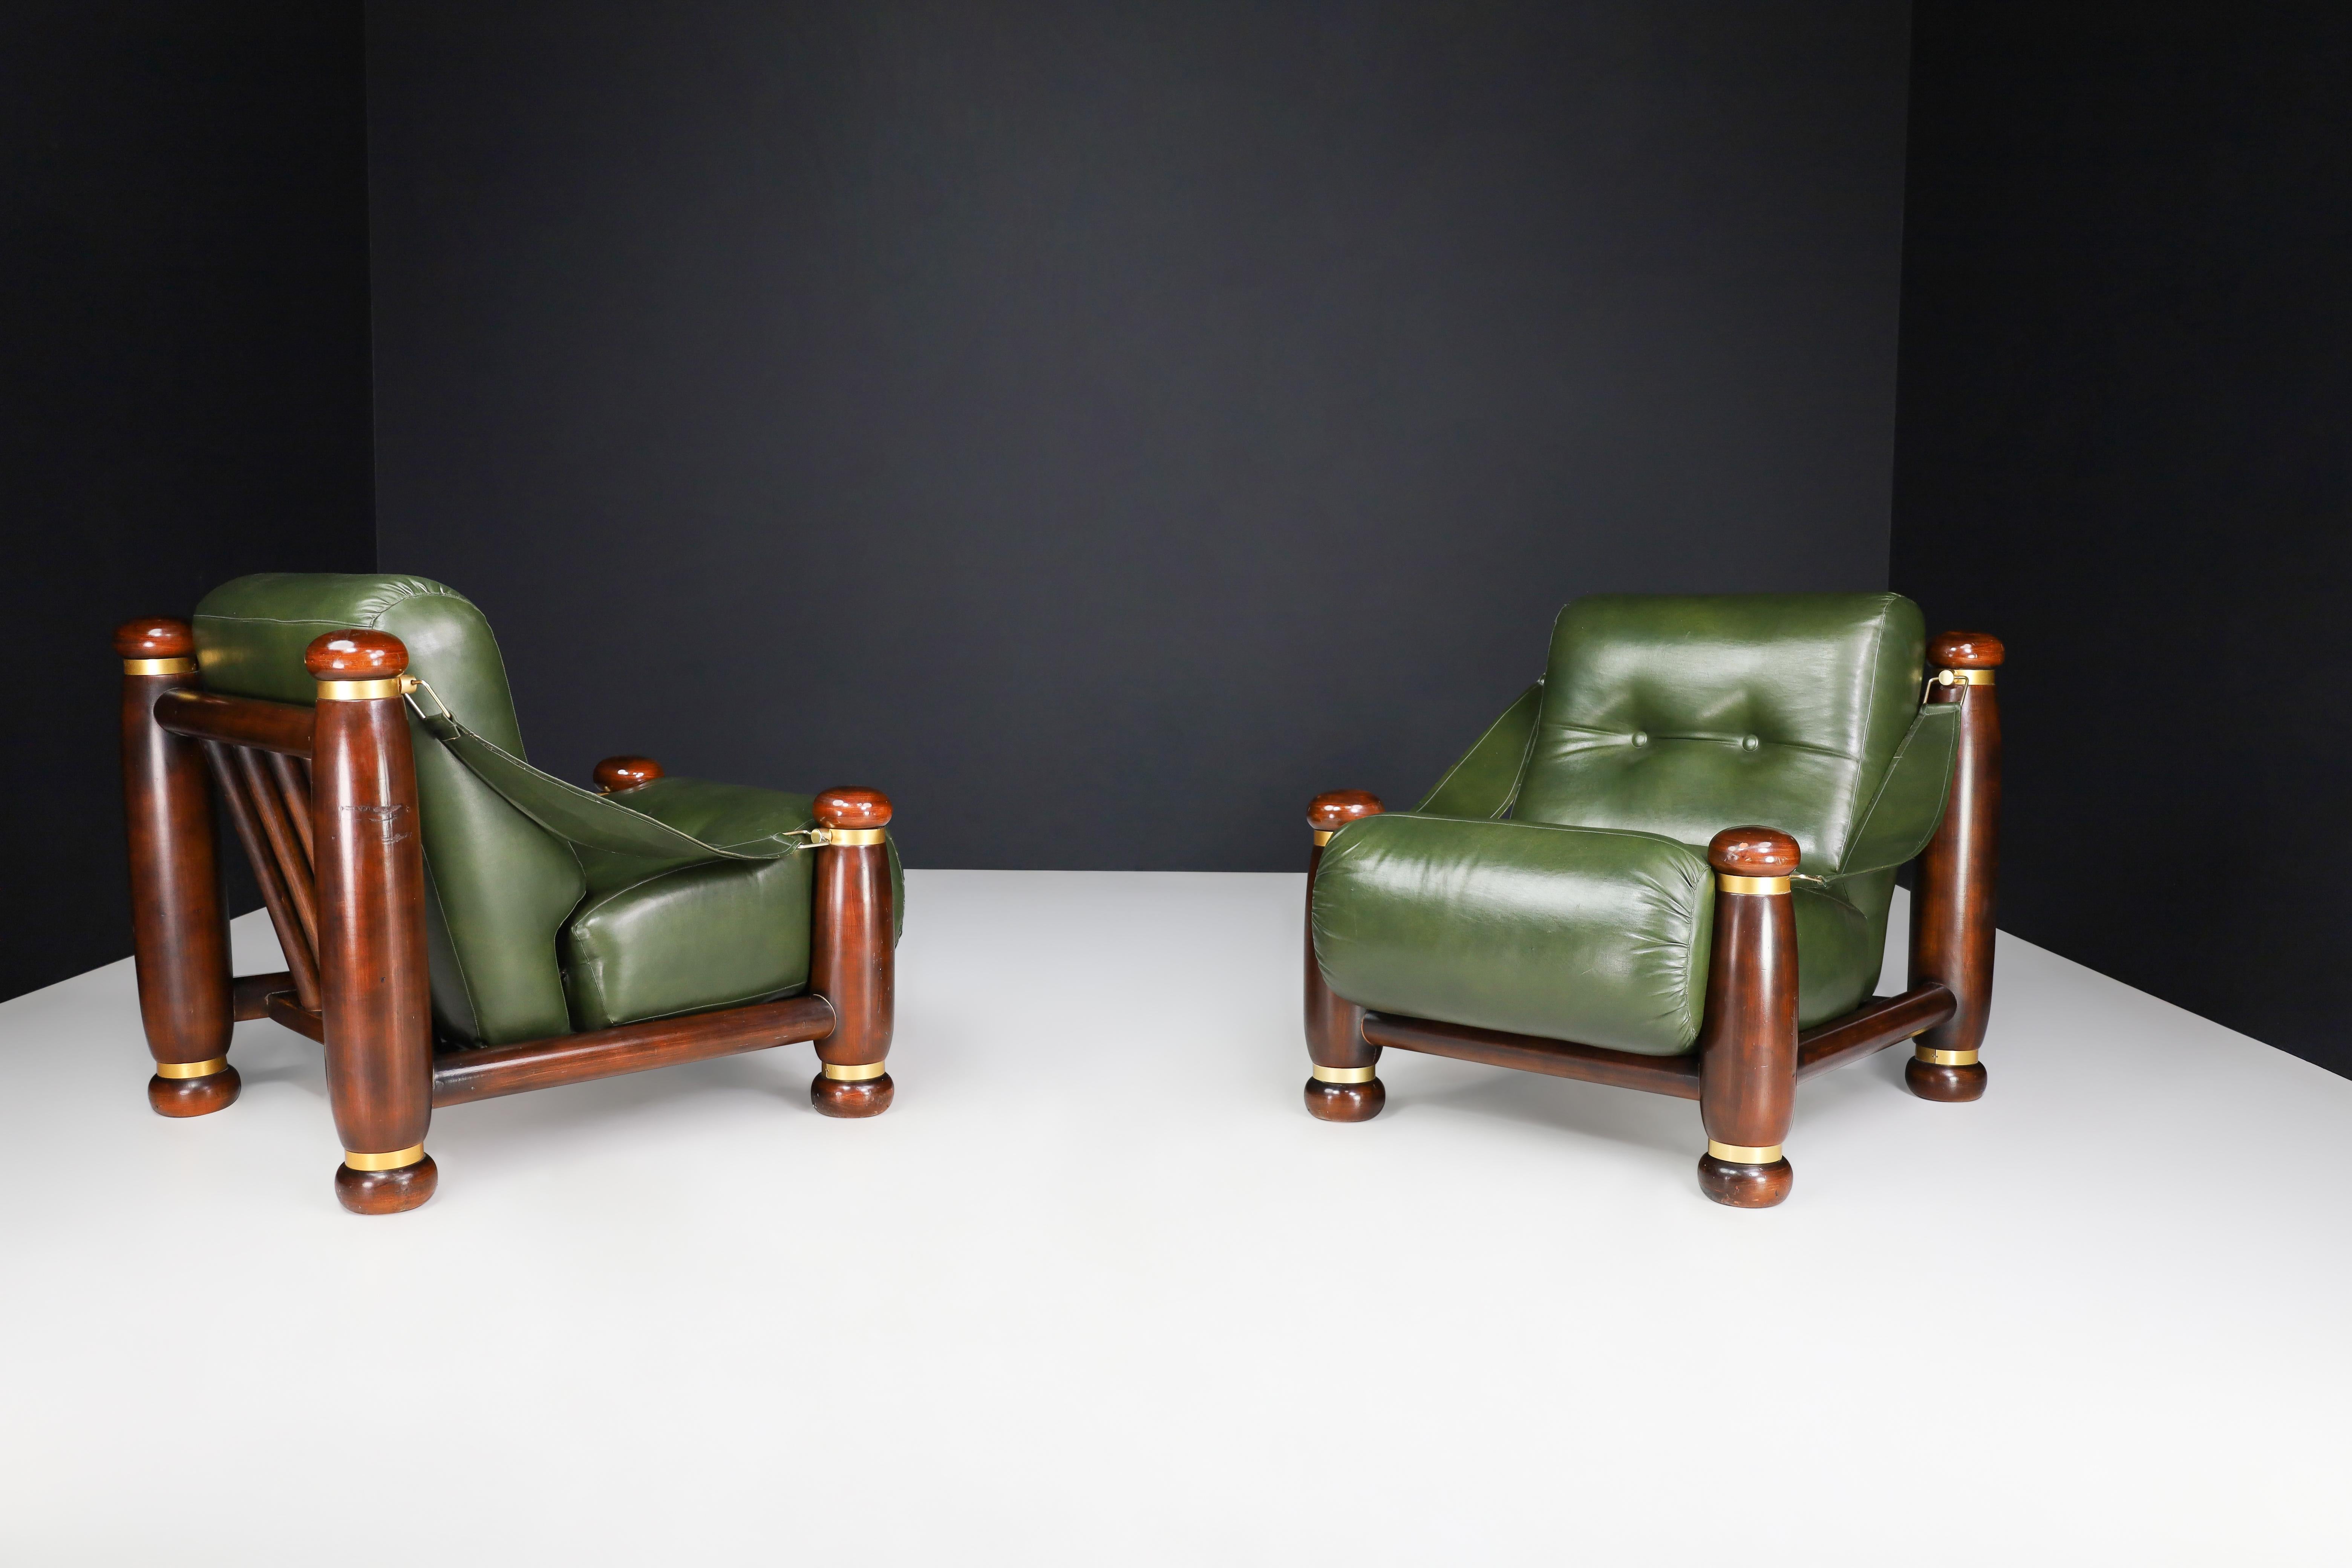 Walnut, Brass, and Green Leather Lounge Chairs from, Italy, 1960s For Sale 3